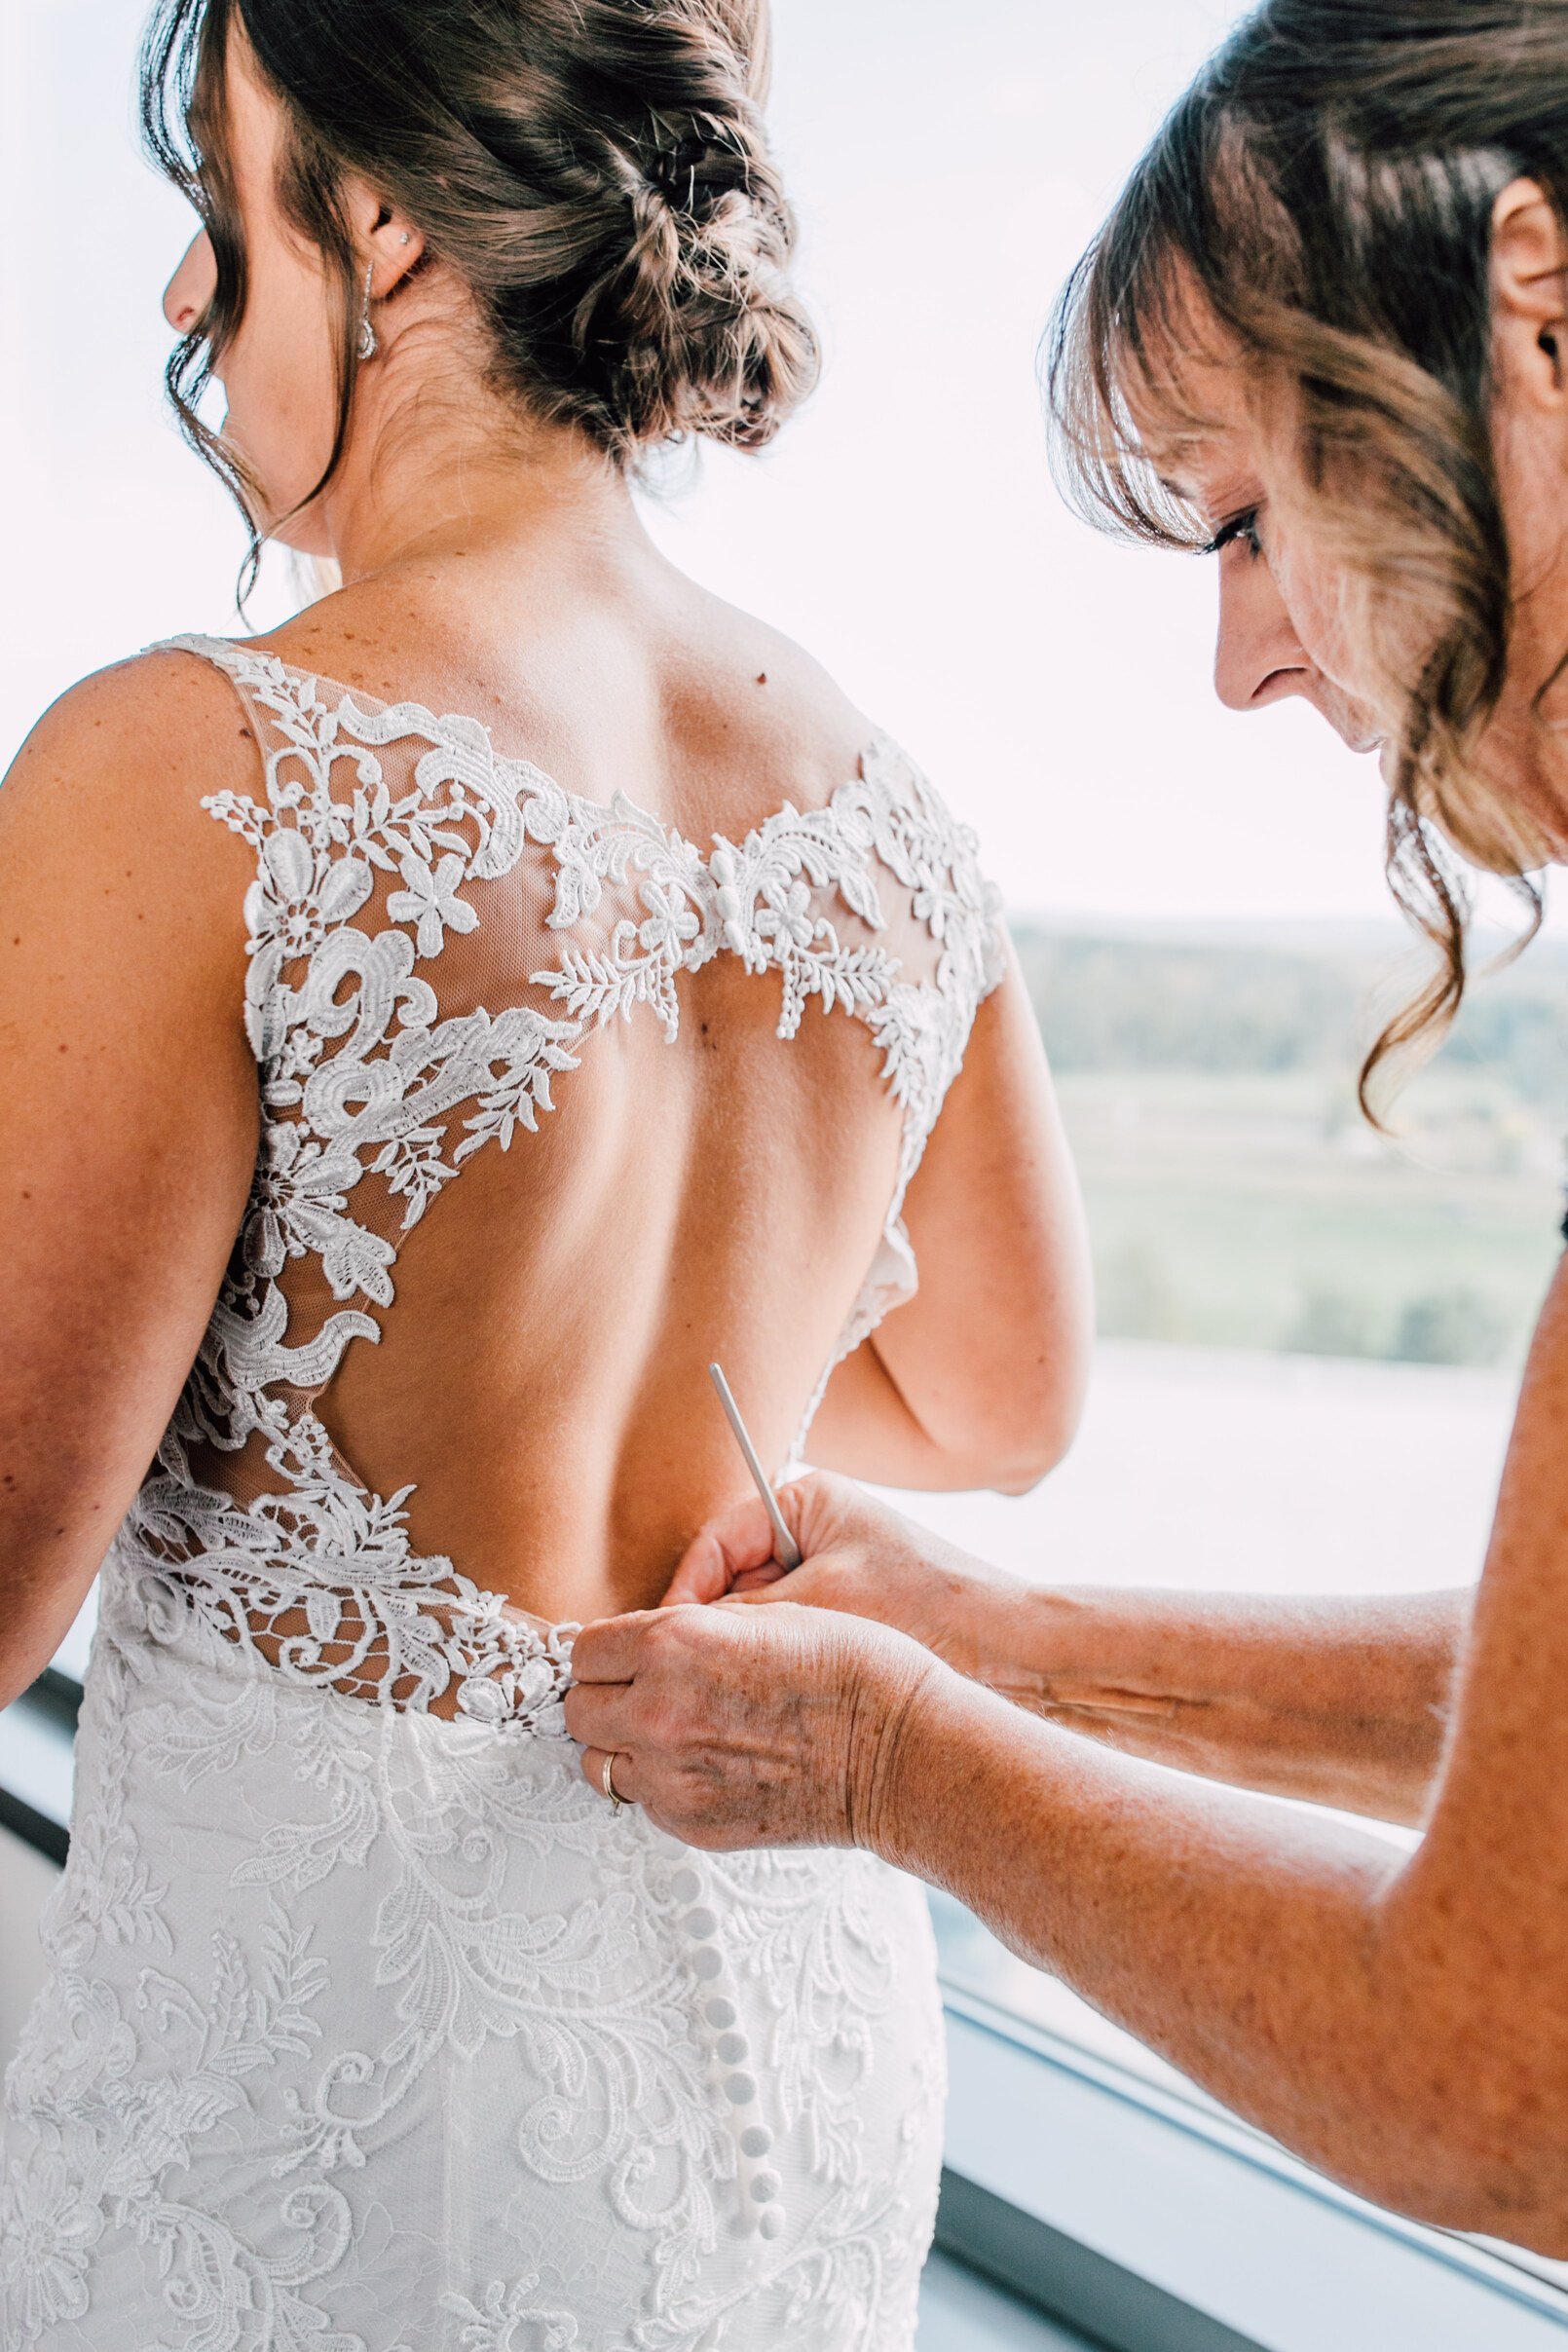  The mother of the bride buttons up the bride’s wedding dress&nbsp; 